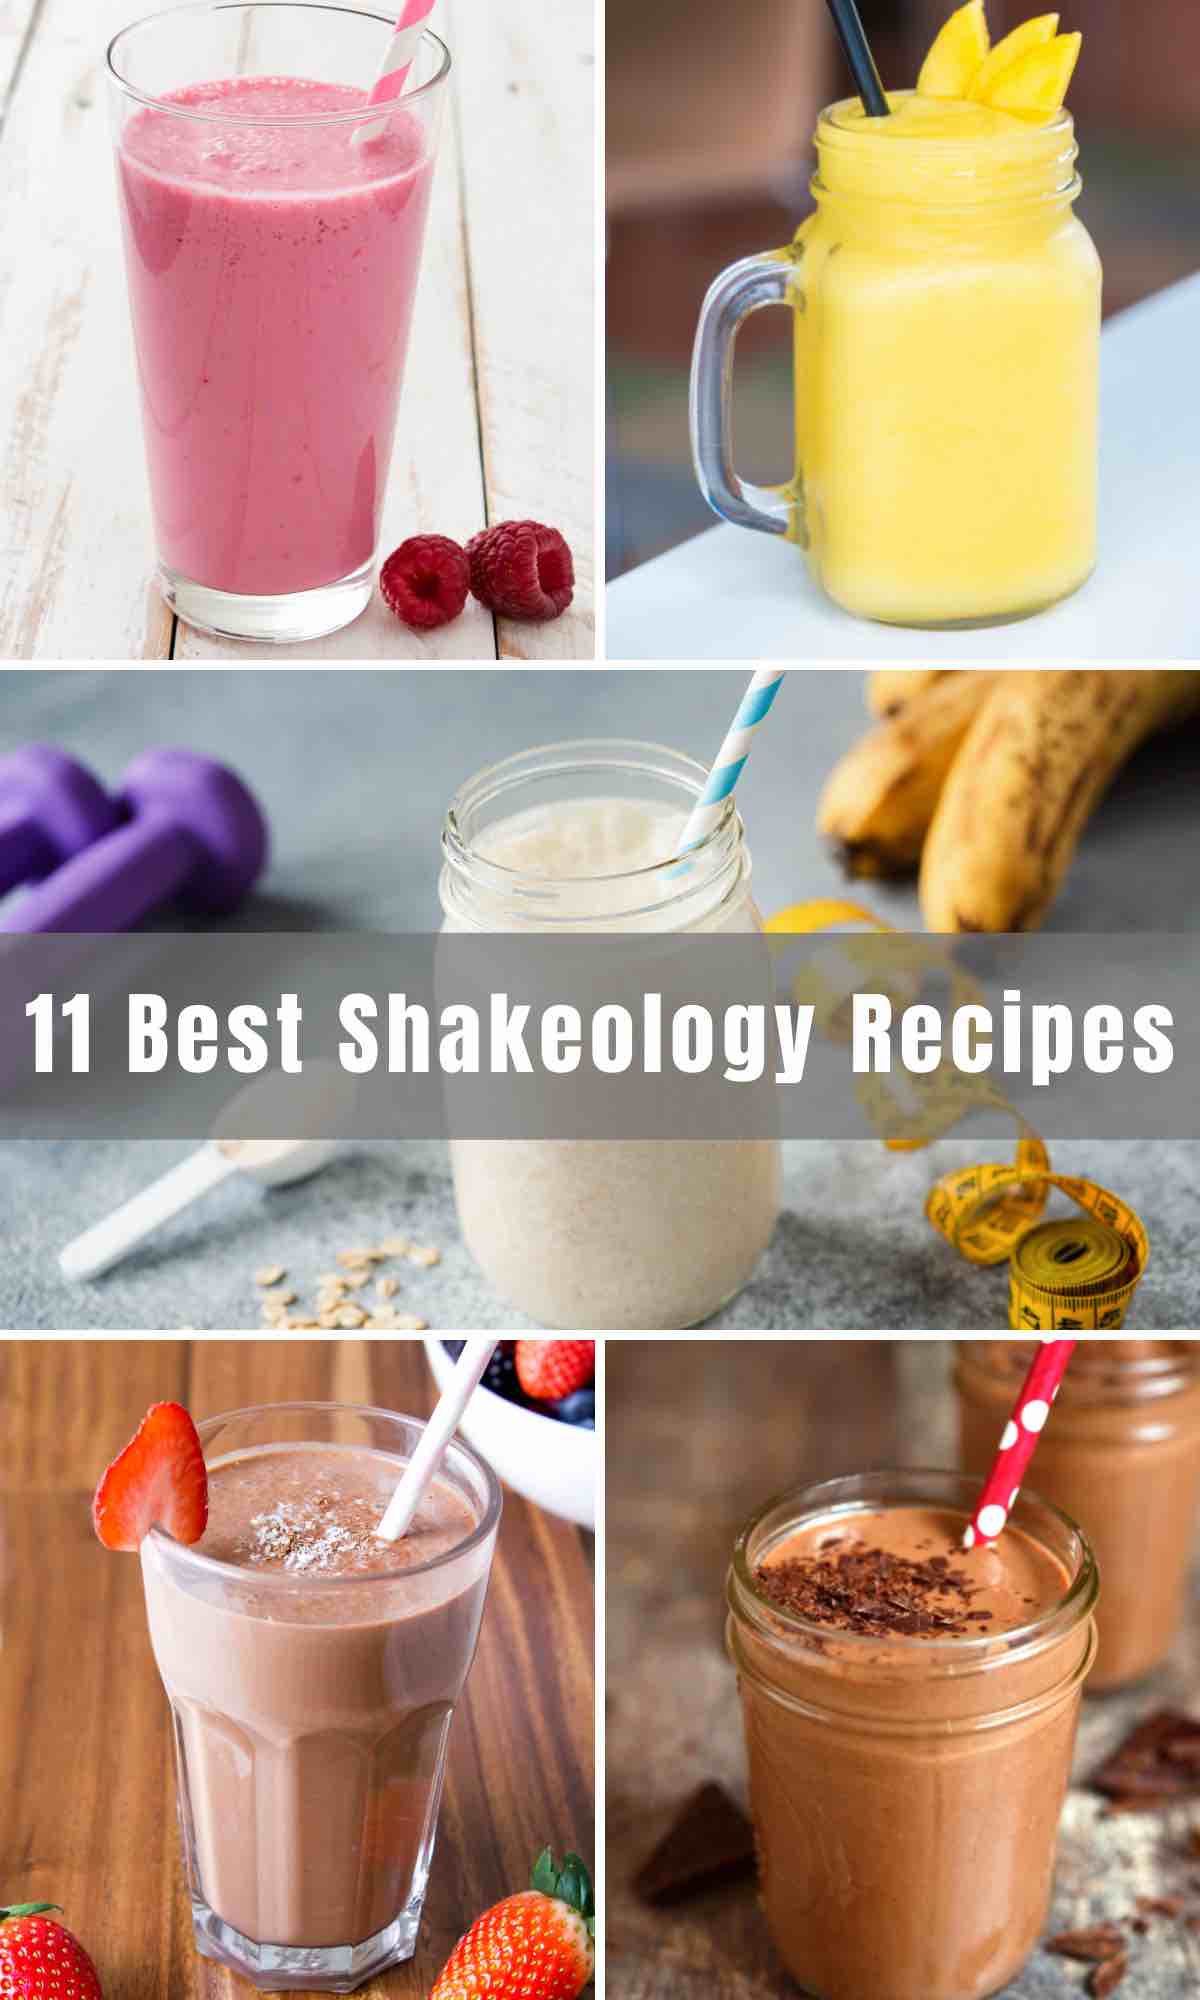 We've rounded up 11 Best Delicious Shakeology Recipes for you. No matter the occasion, time of year, or time of day, Shakeology has a recipe for you! From lattes to fruit shakes to shakes that taste like s’mores and birthday cake! You truly can’t go wrong! So go on, indulge and enjoy!